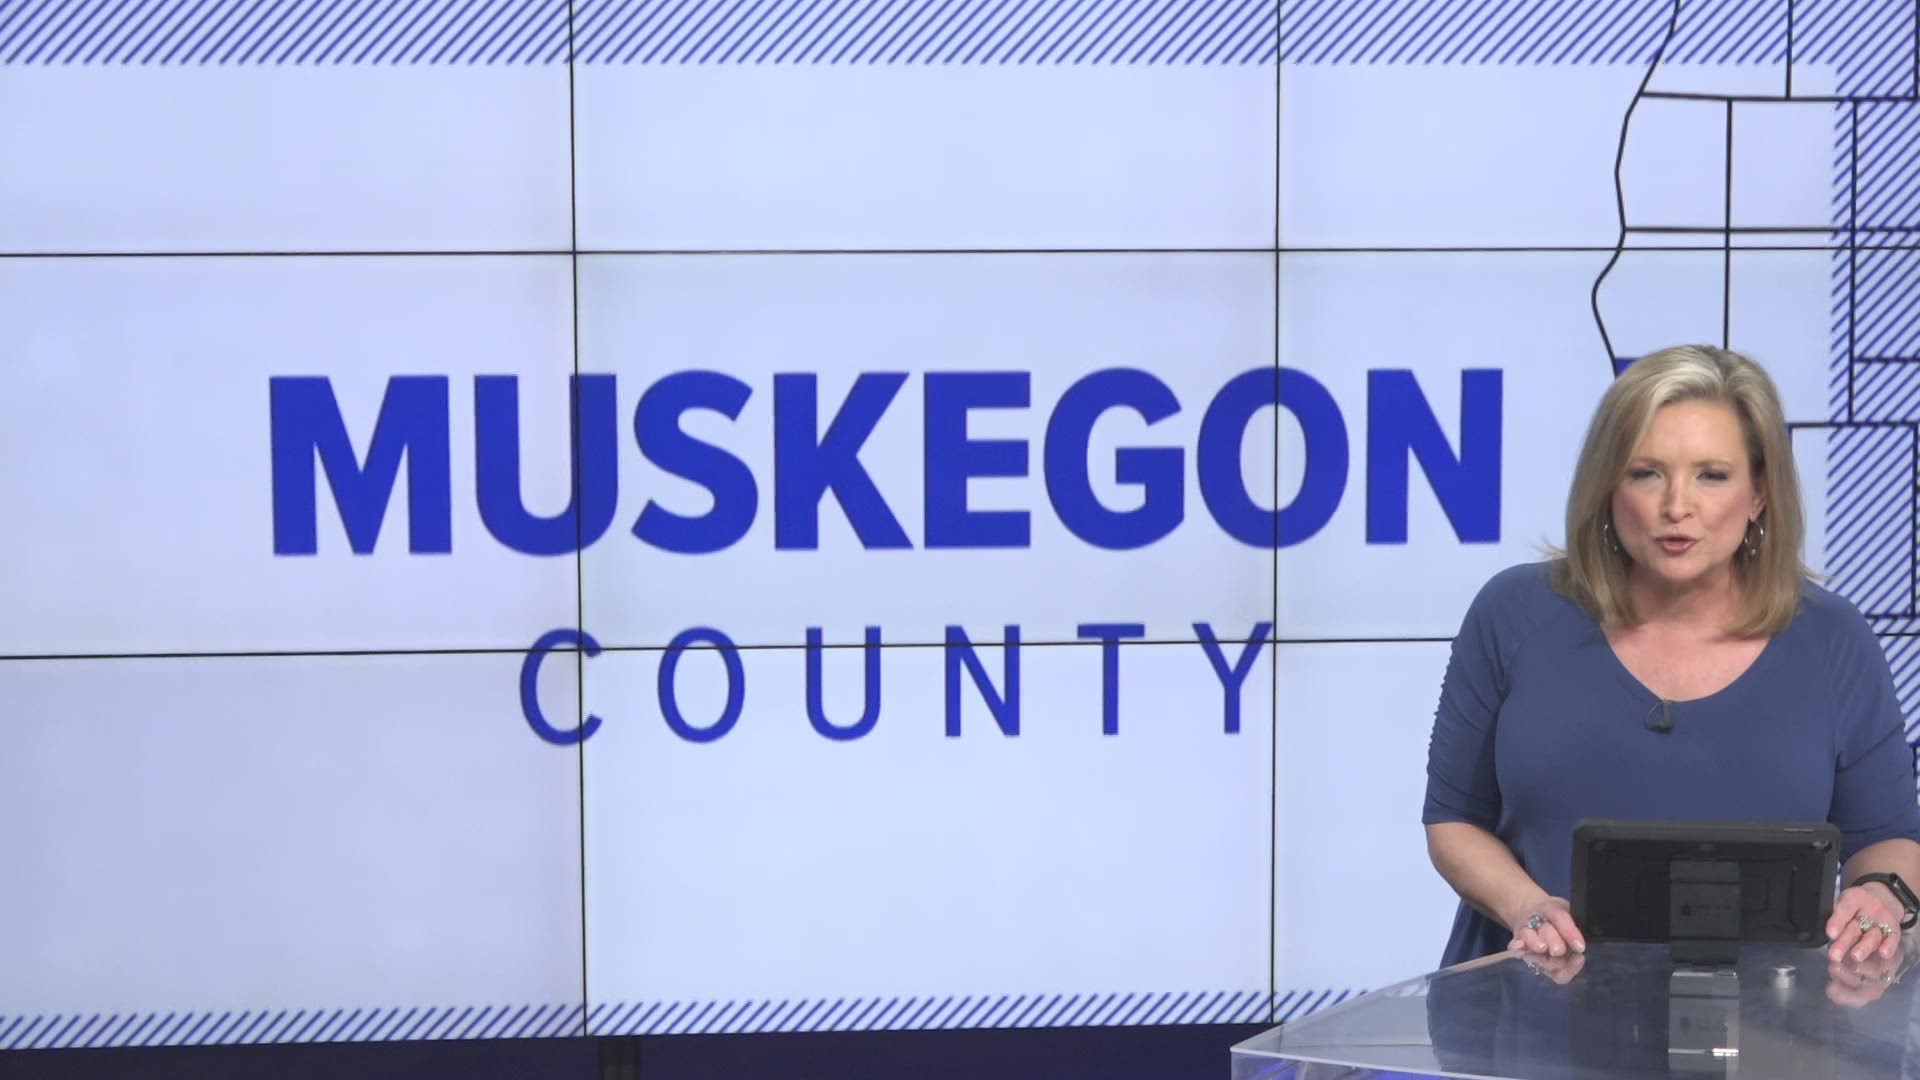 Last week a state of emergency was declared that allowed the Muskegon County Board of Commissioners to meet over Zoom. It needed the board's approval to continue.